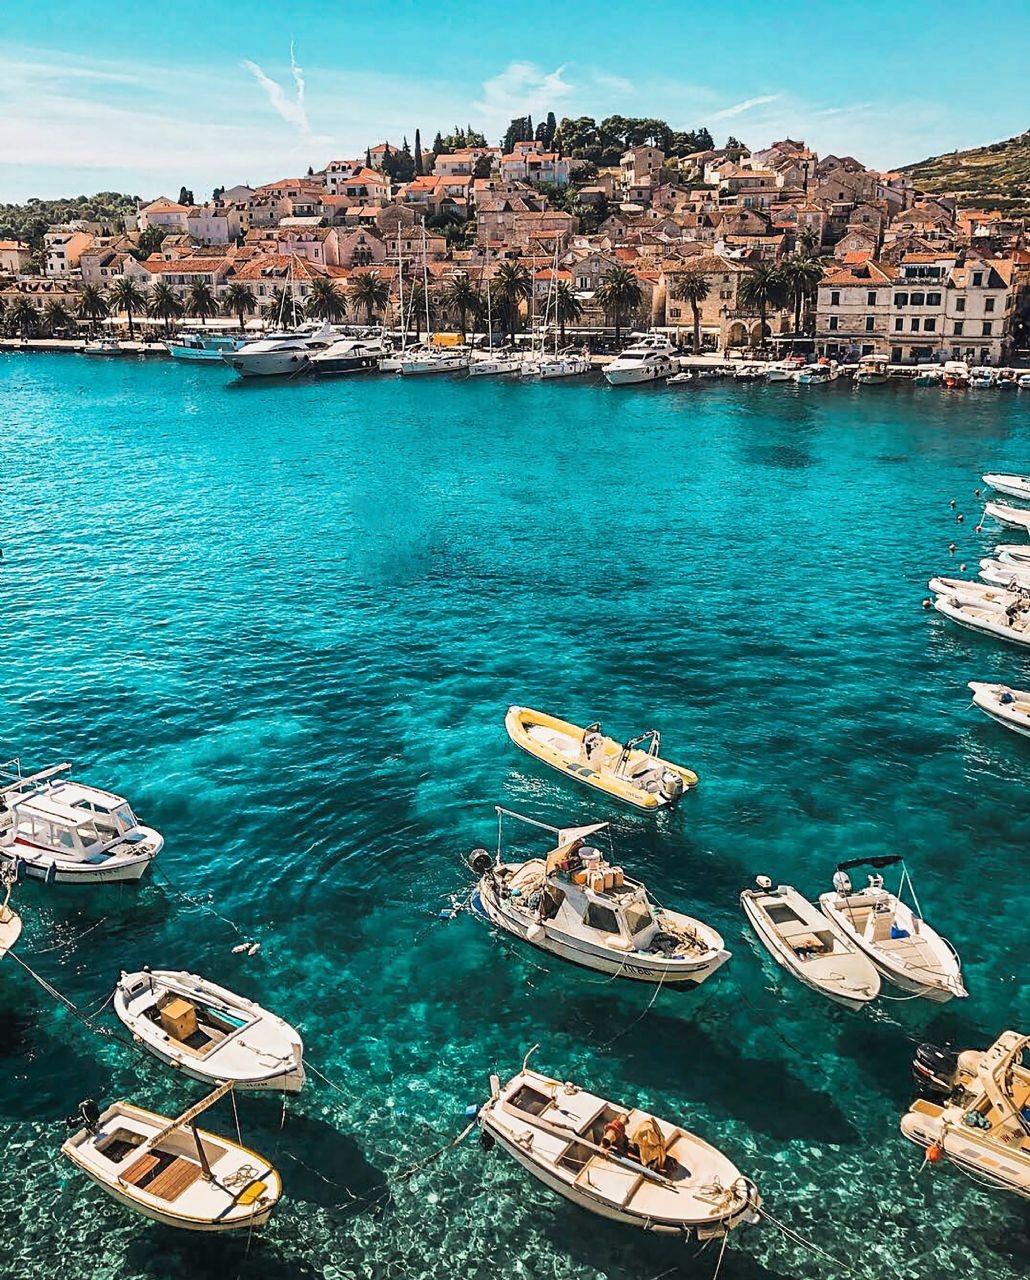 If you're looking for a beautiful, sun-soaked destination with stunning beaches, rich history, and delicious food, Croatia is the perfect choice